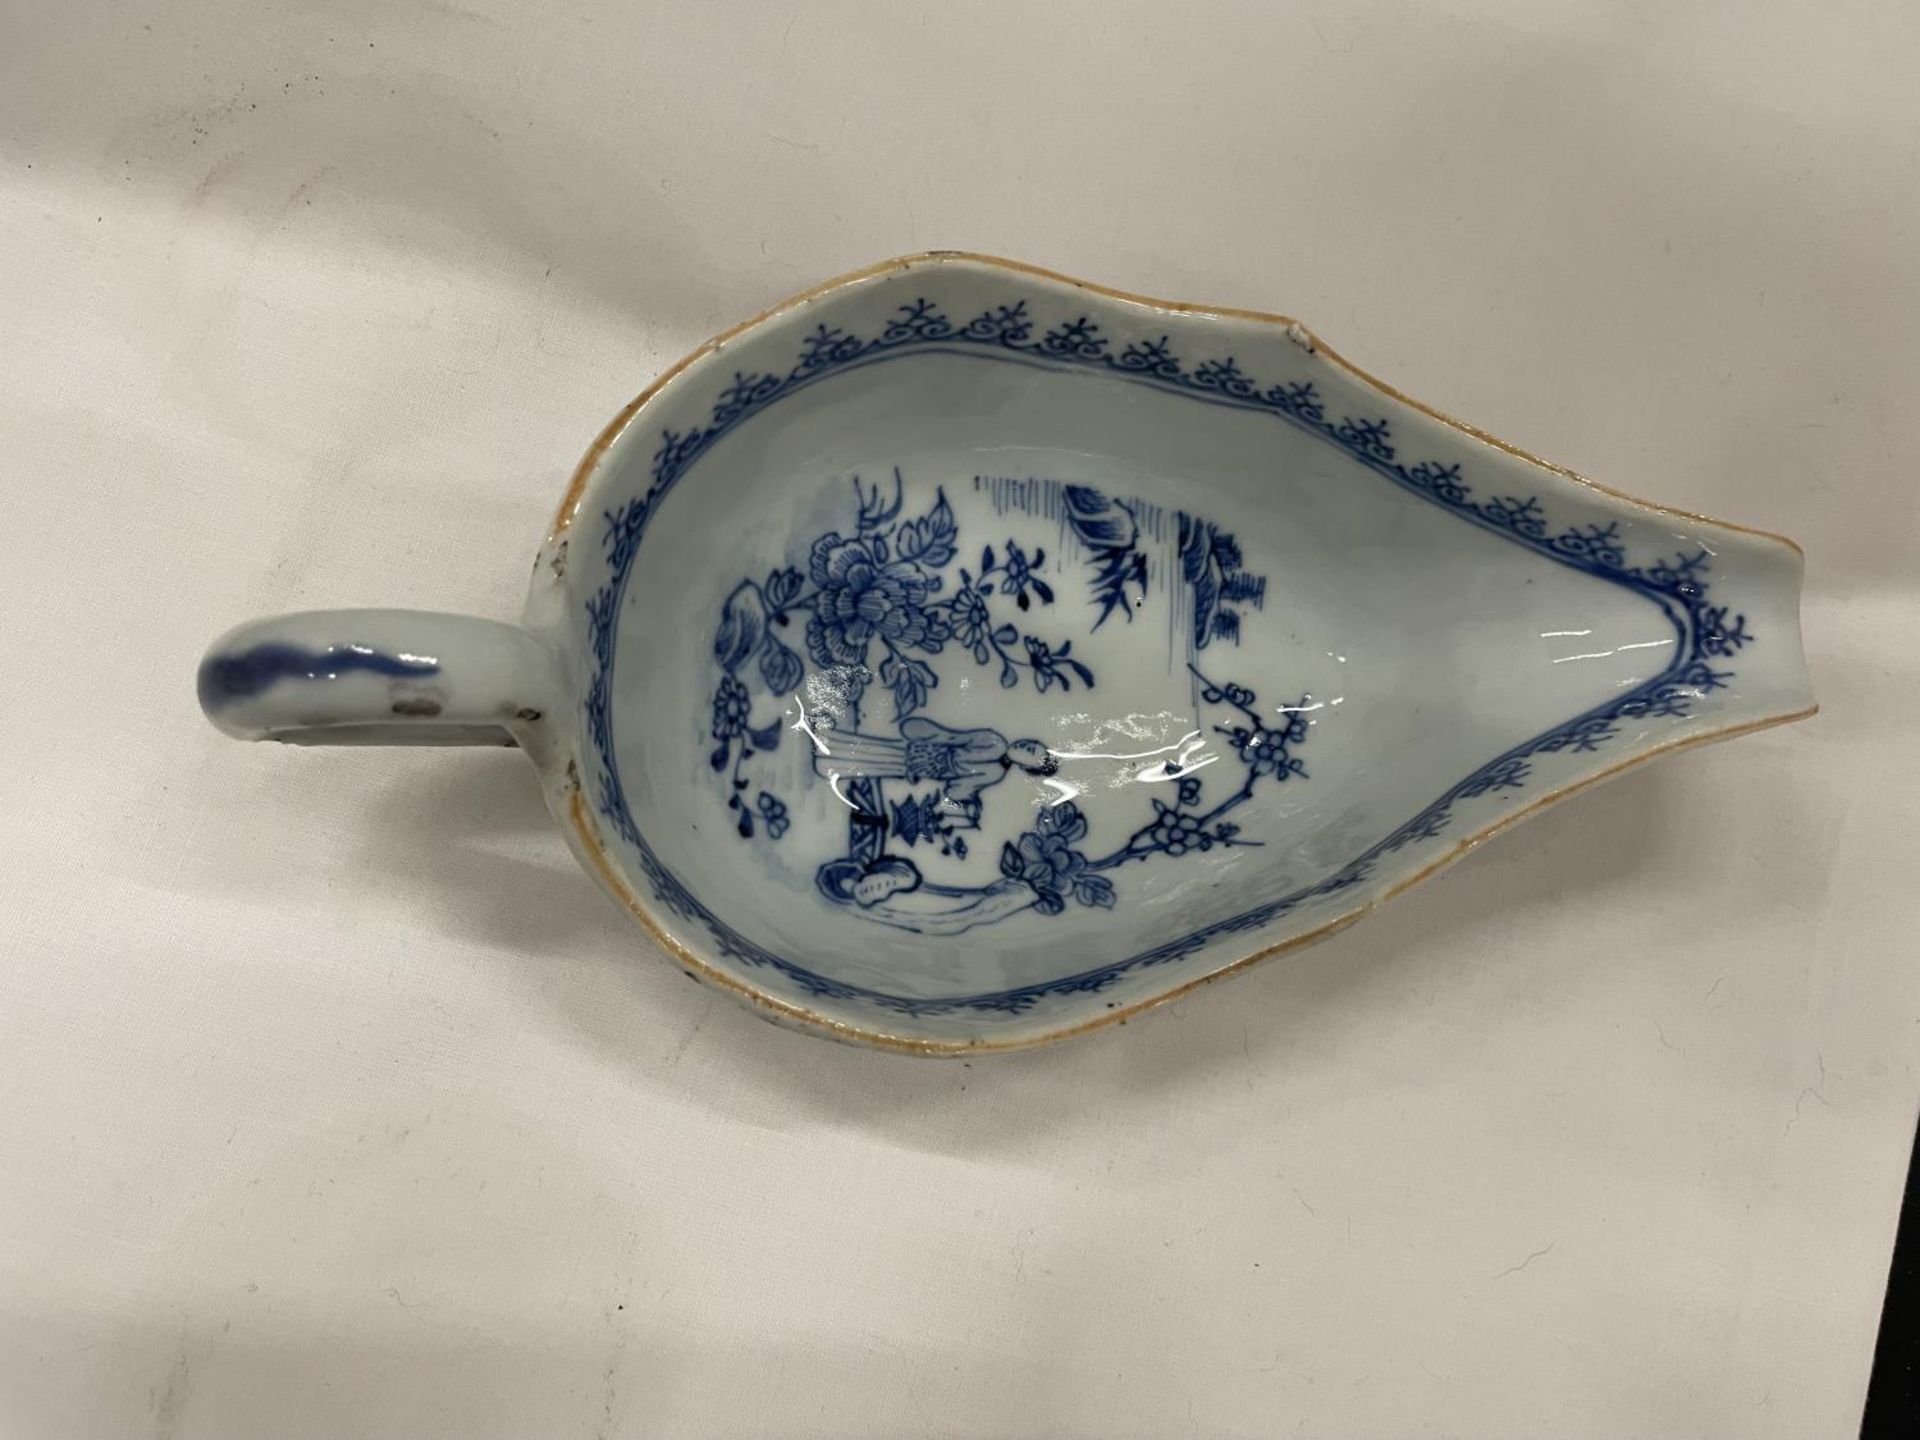 A BELIEVED TO BE LATE 18TH/EARLY 19TH CENTURY CHINESE QING DYNASTY/NANKIN BLUE AND WHITE SAUCE - Image 5 of 8